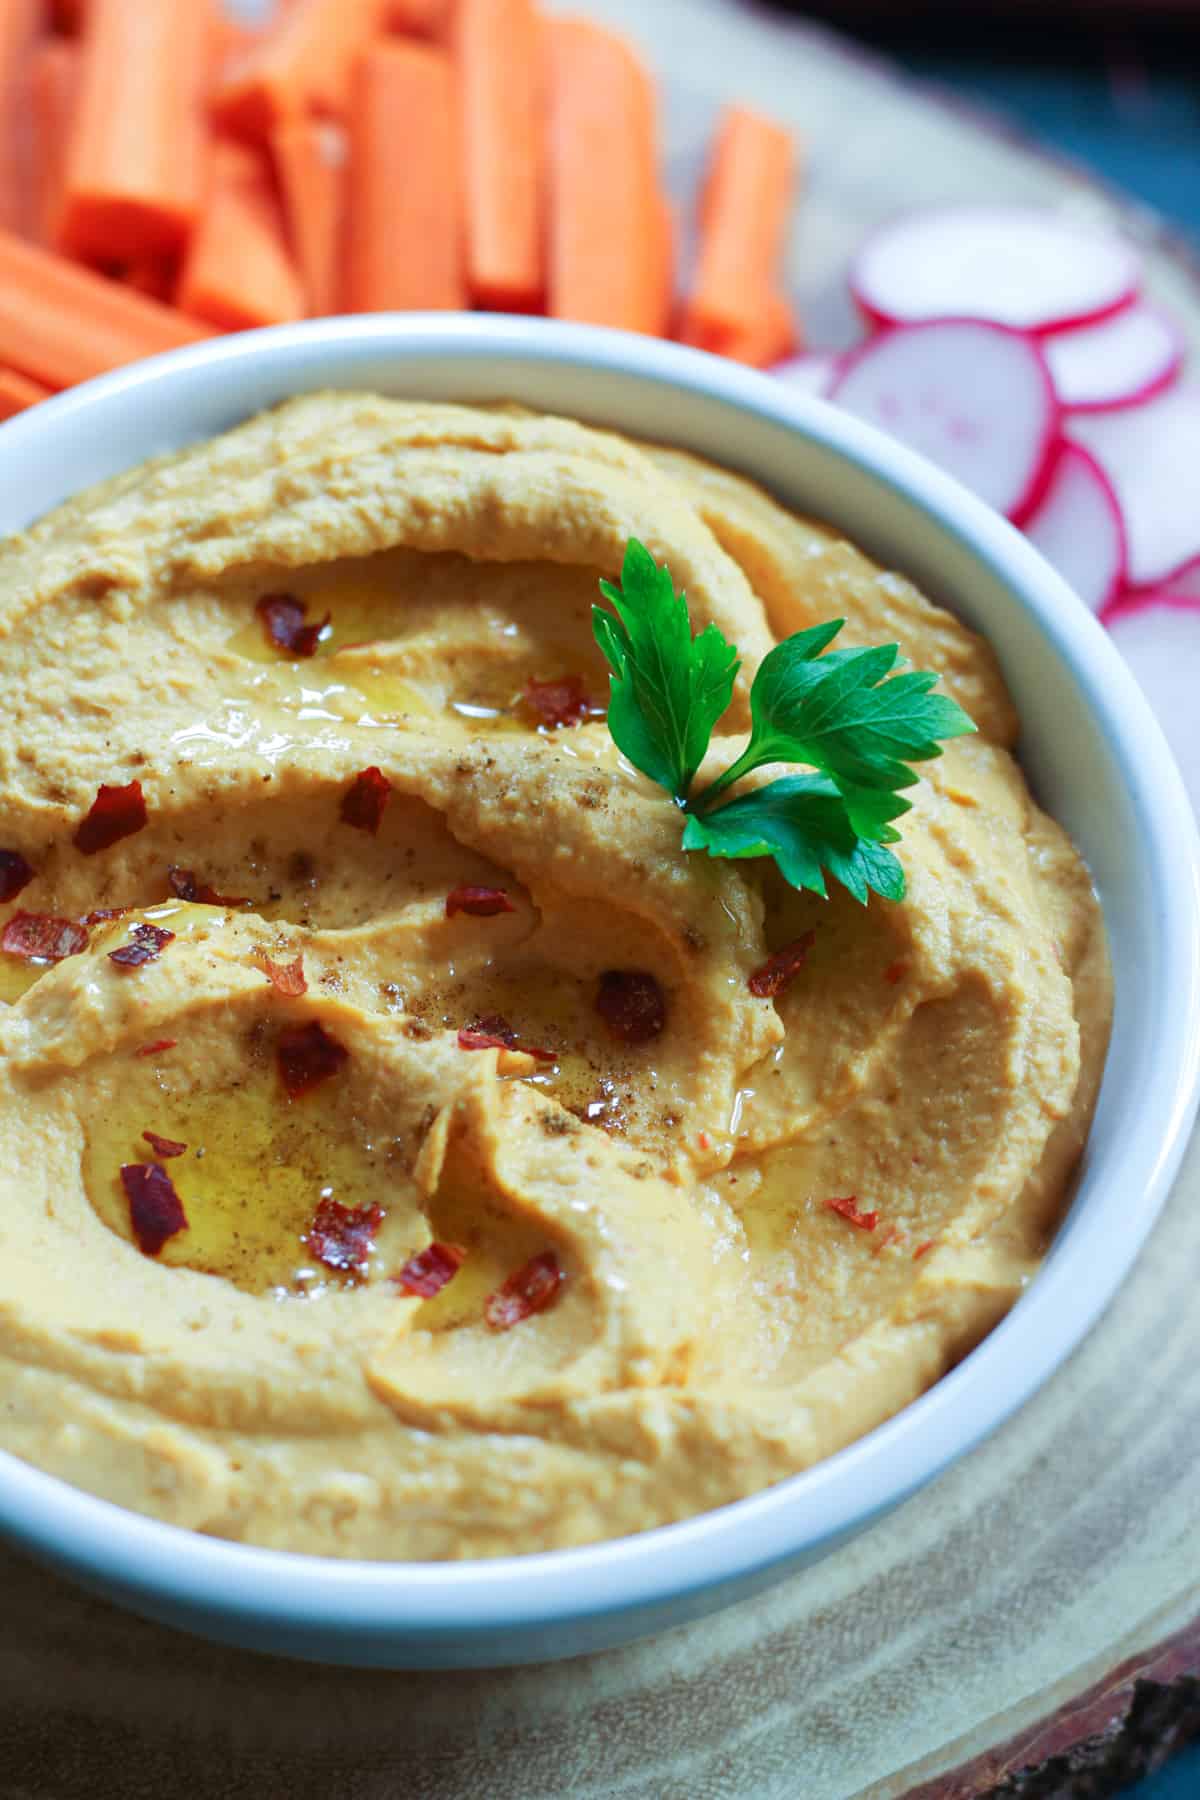 This hummus recipe is easy and very delicious. It's spicy and comes together in no time. 